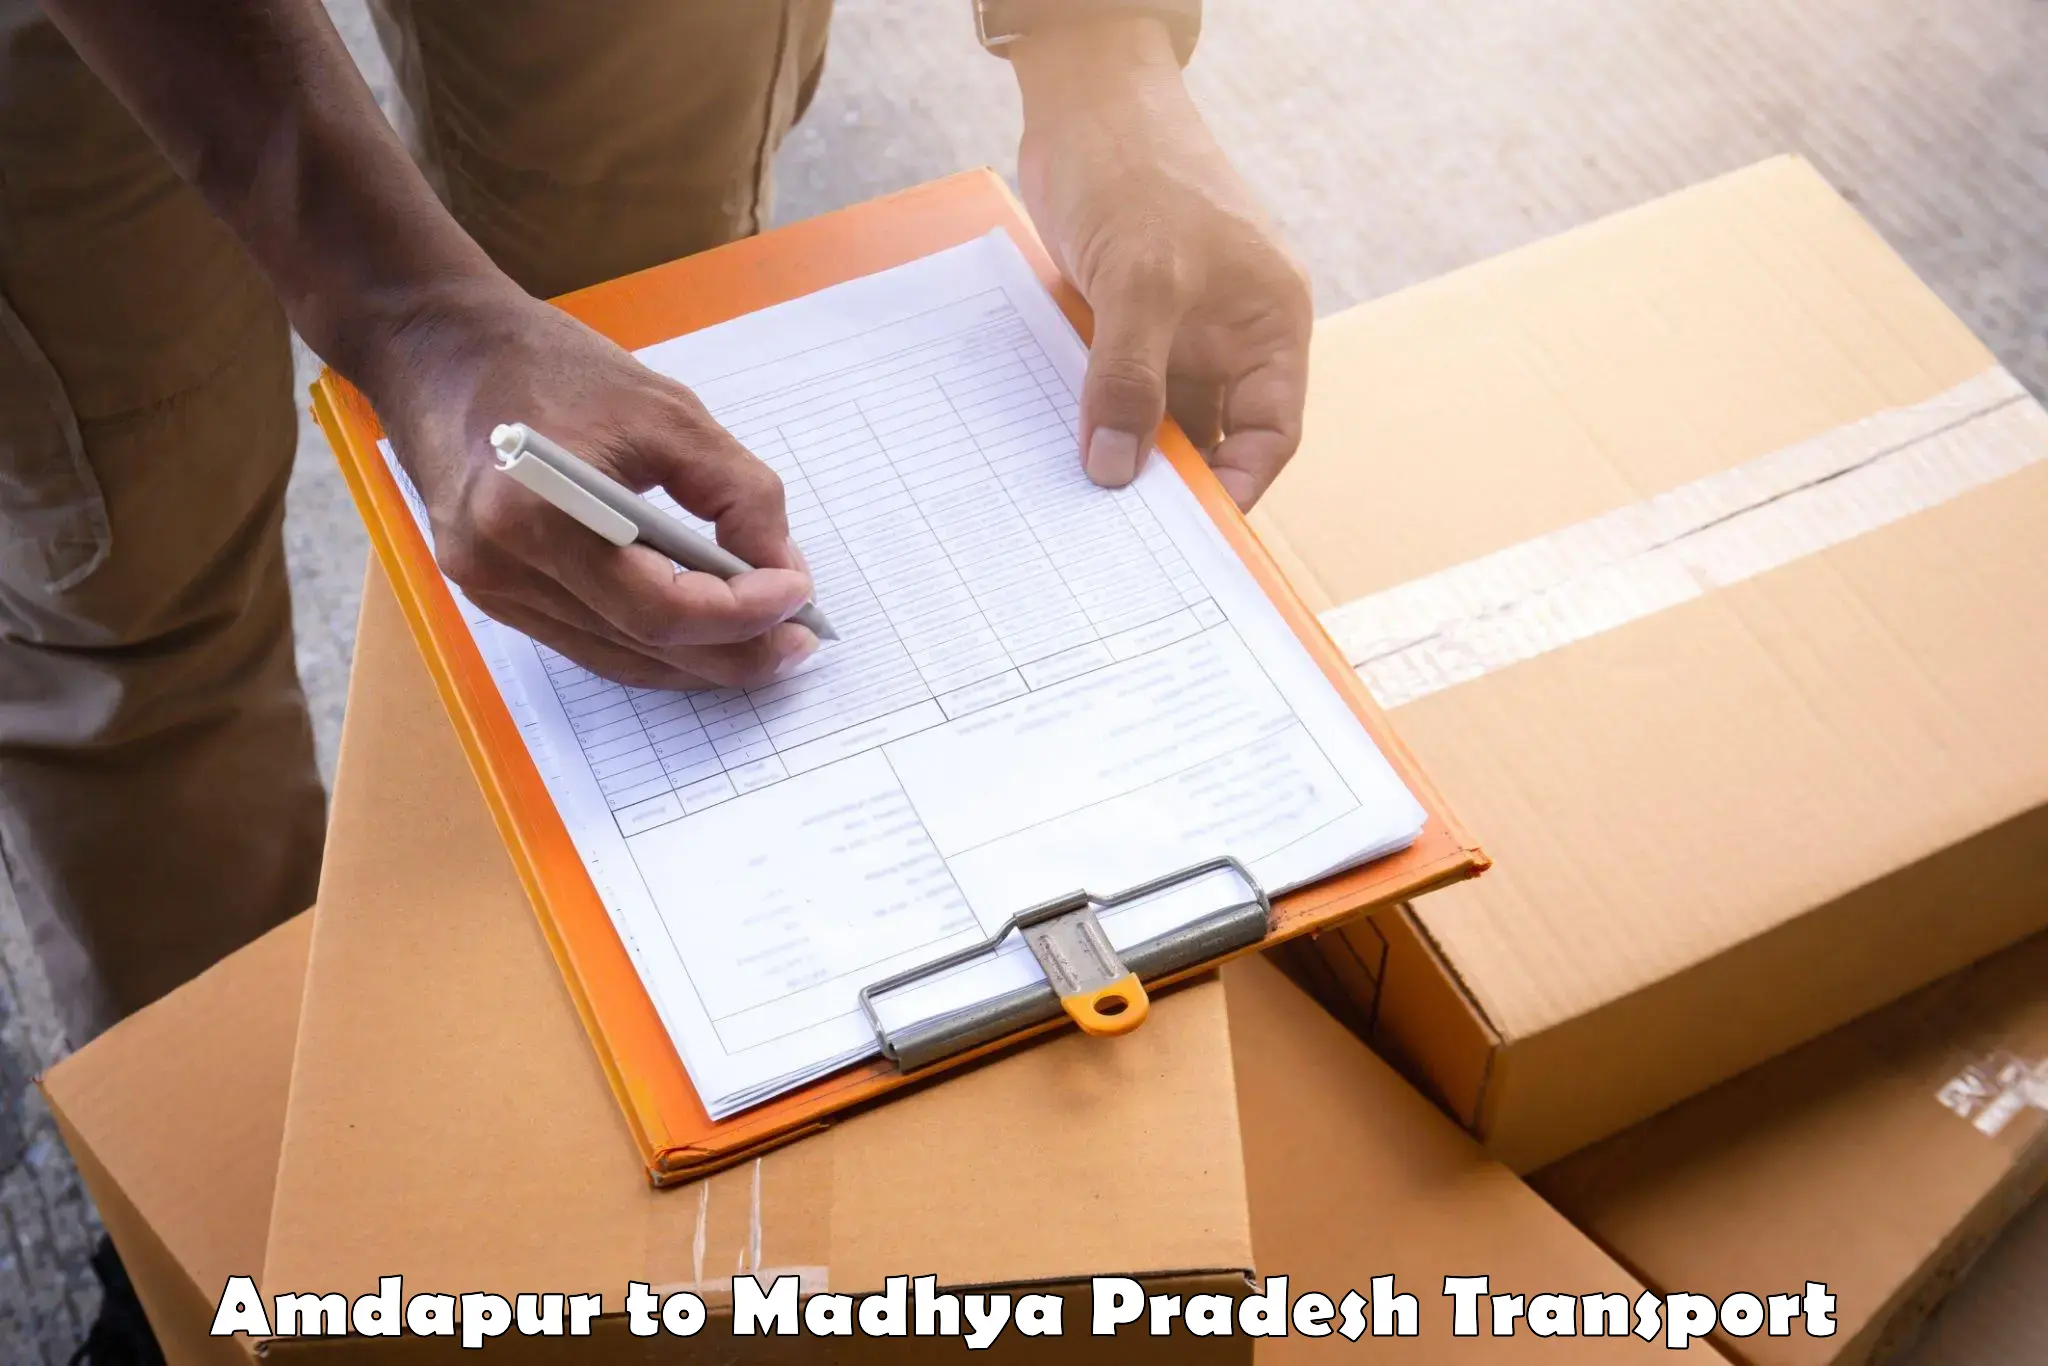 Part load transport service in India Amdapur to Maheshwar